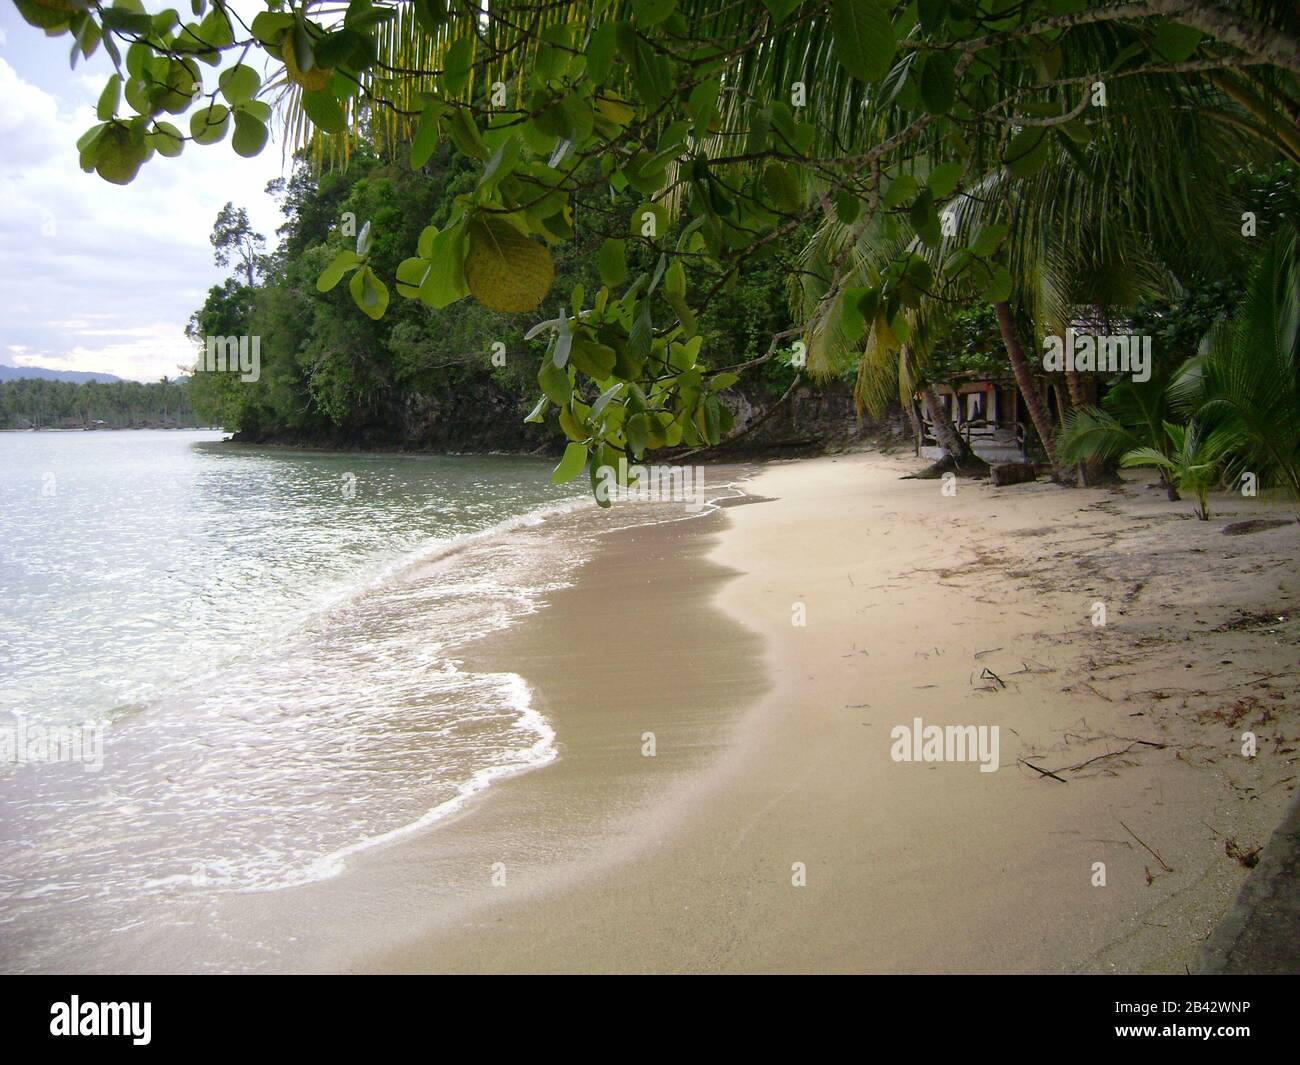 Fine, white sand with soft waves at a resort in Surigao del Sur, Philippines. Stock Photo